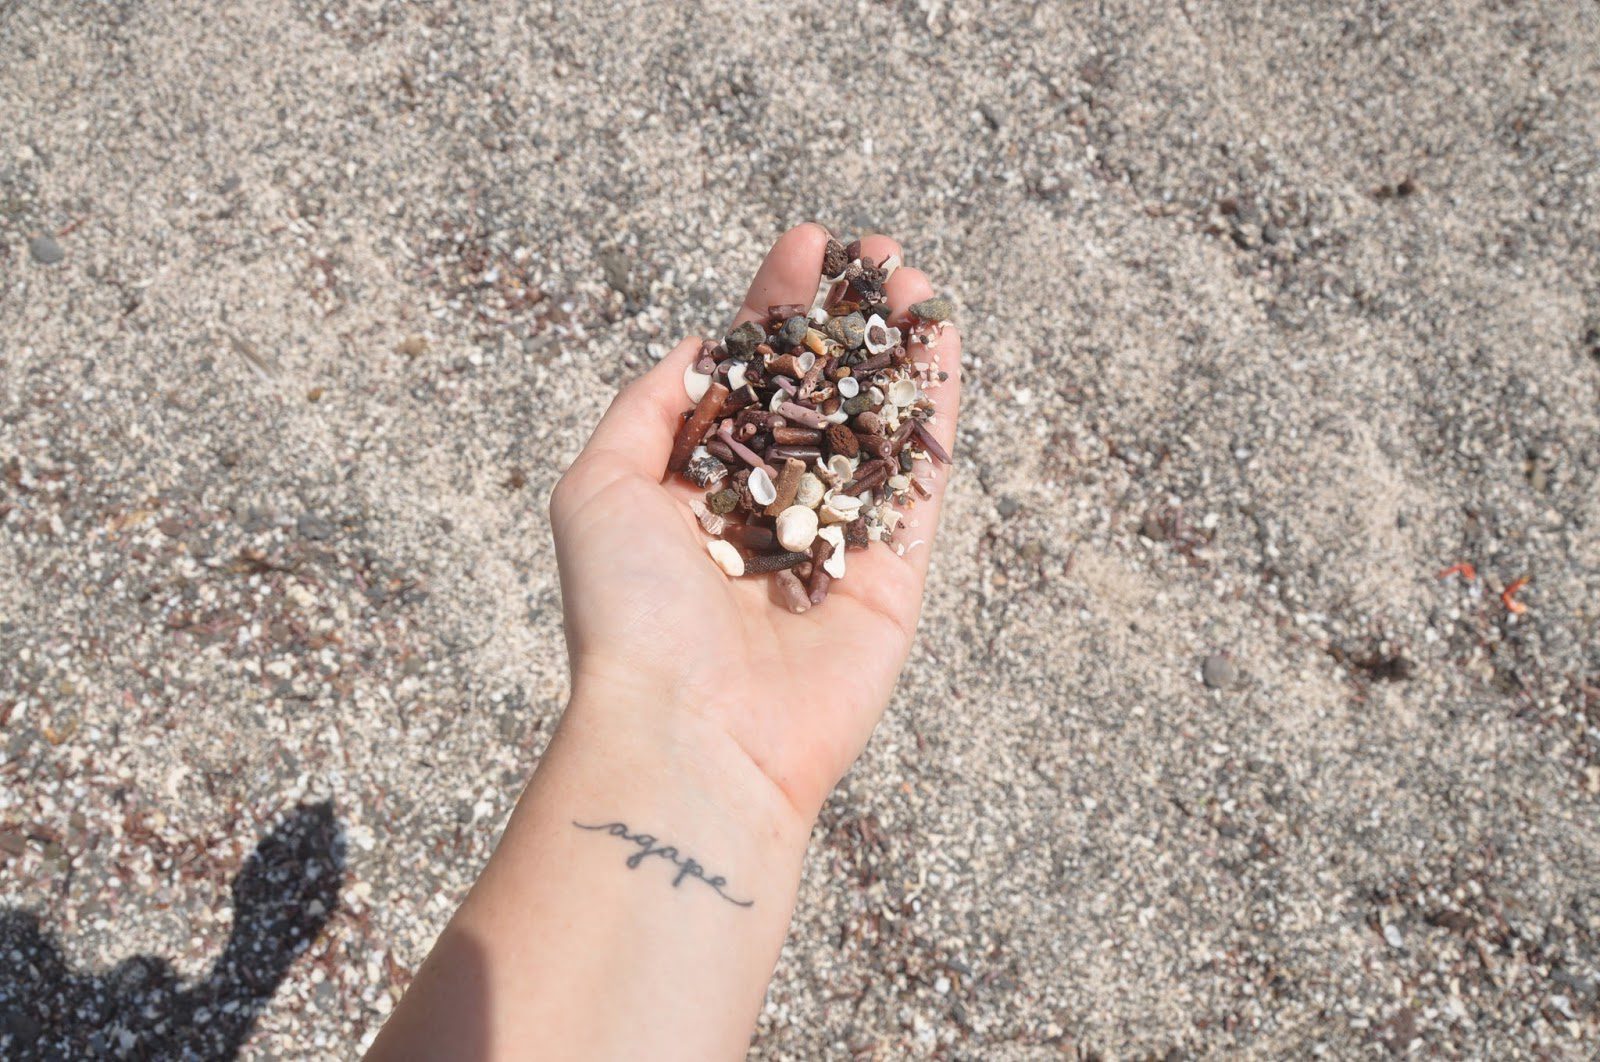 The sand on San Cristobal was made of broken shells and sea urchins